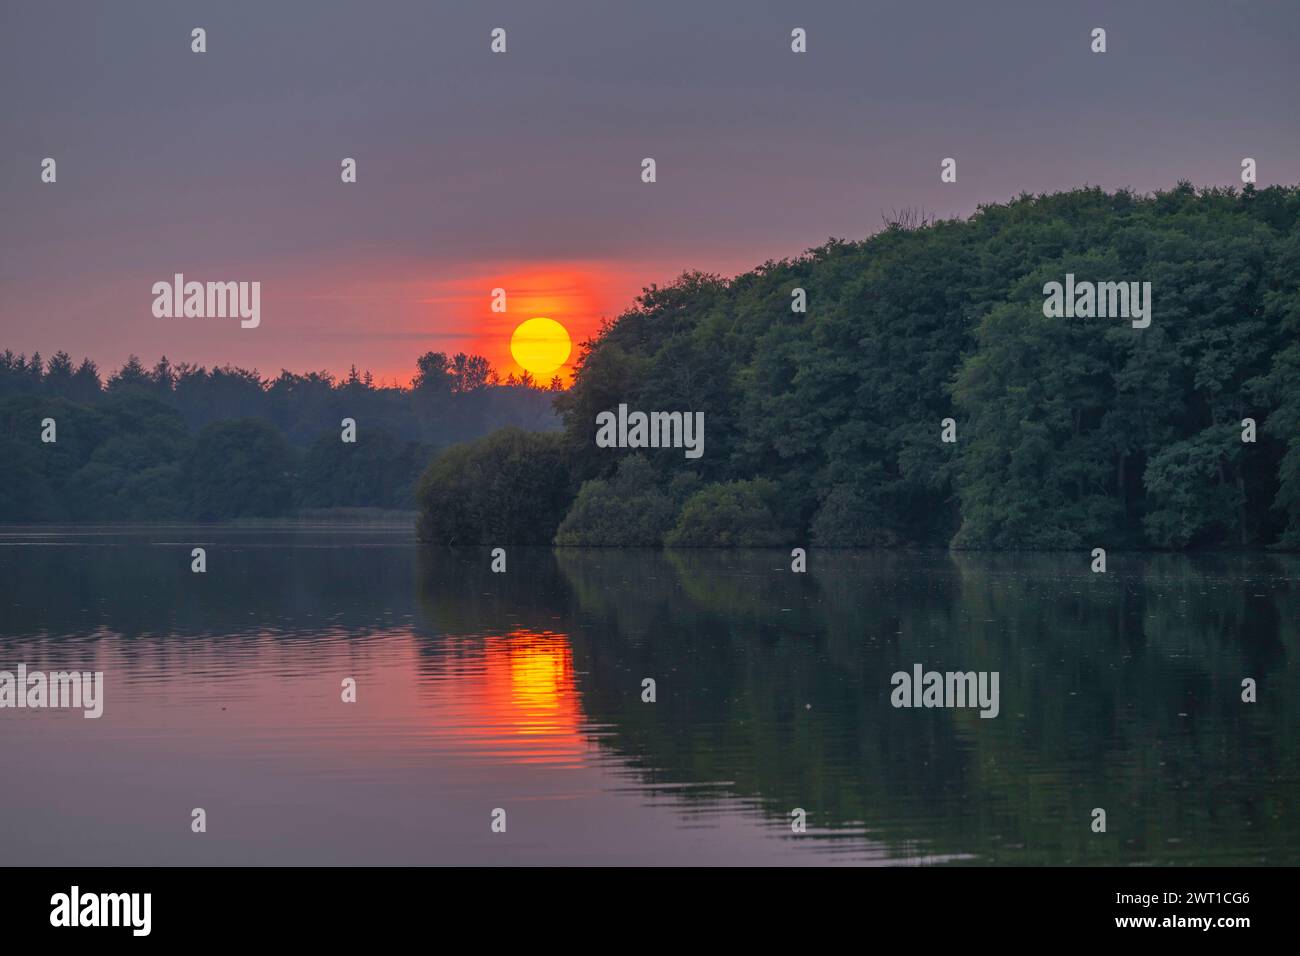 lake Bistensee in the evening sun, Germany, Schleswig-Holstein, Huettener Berge Stock Photo